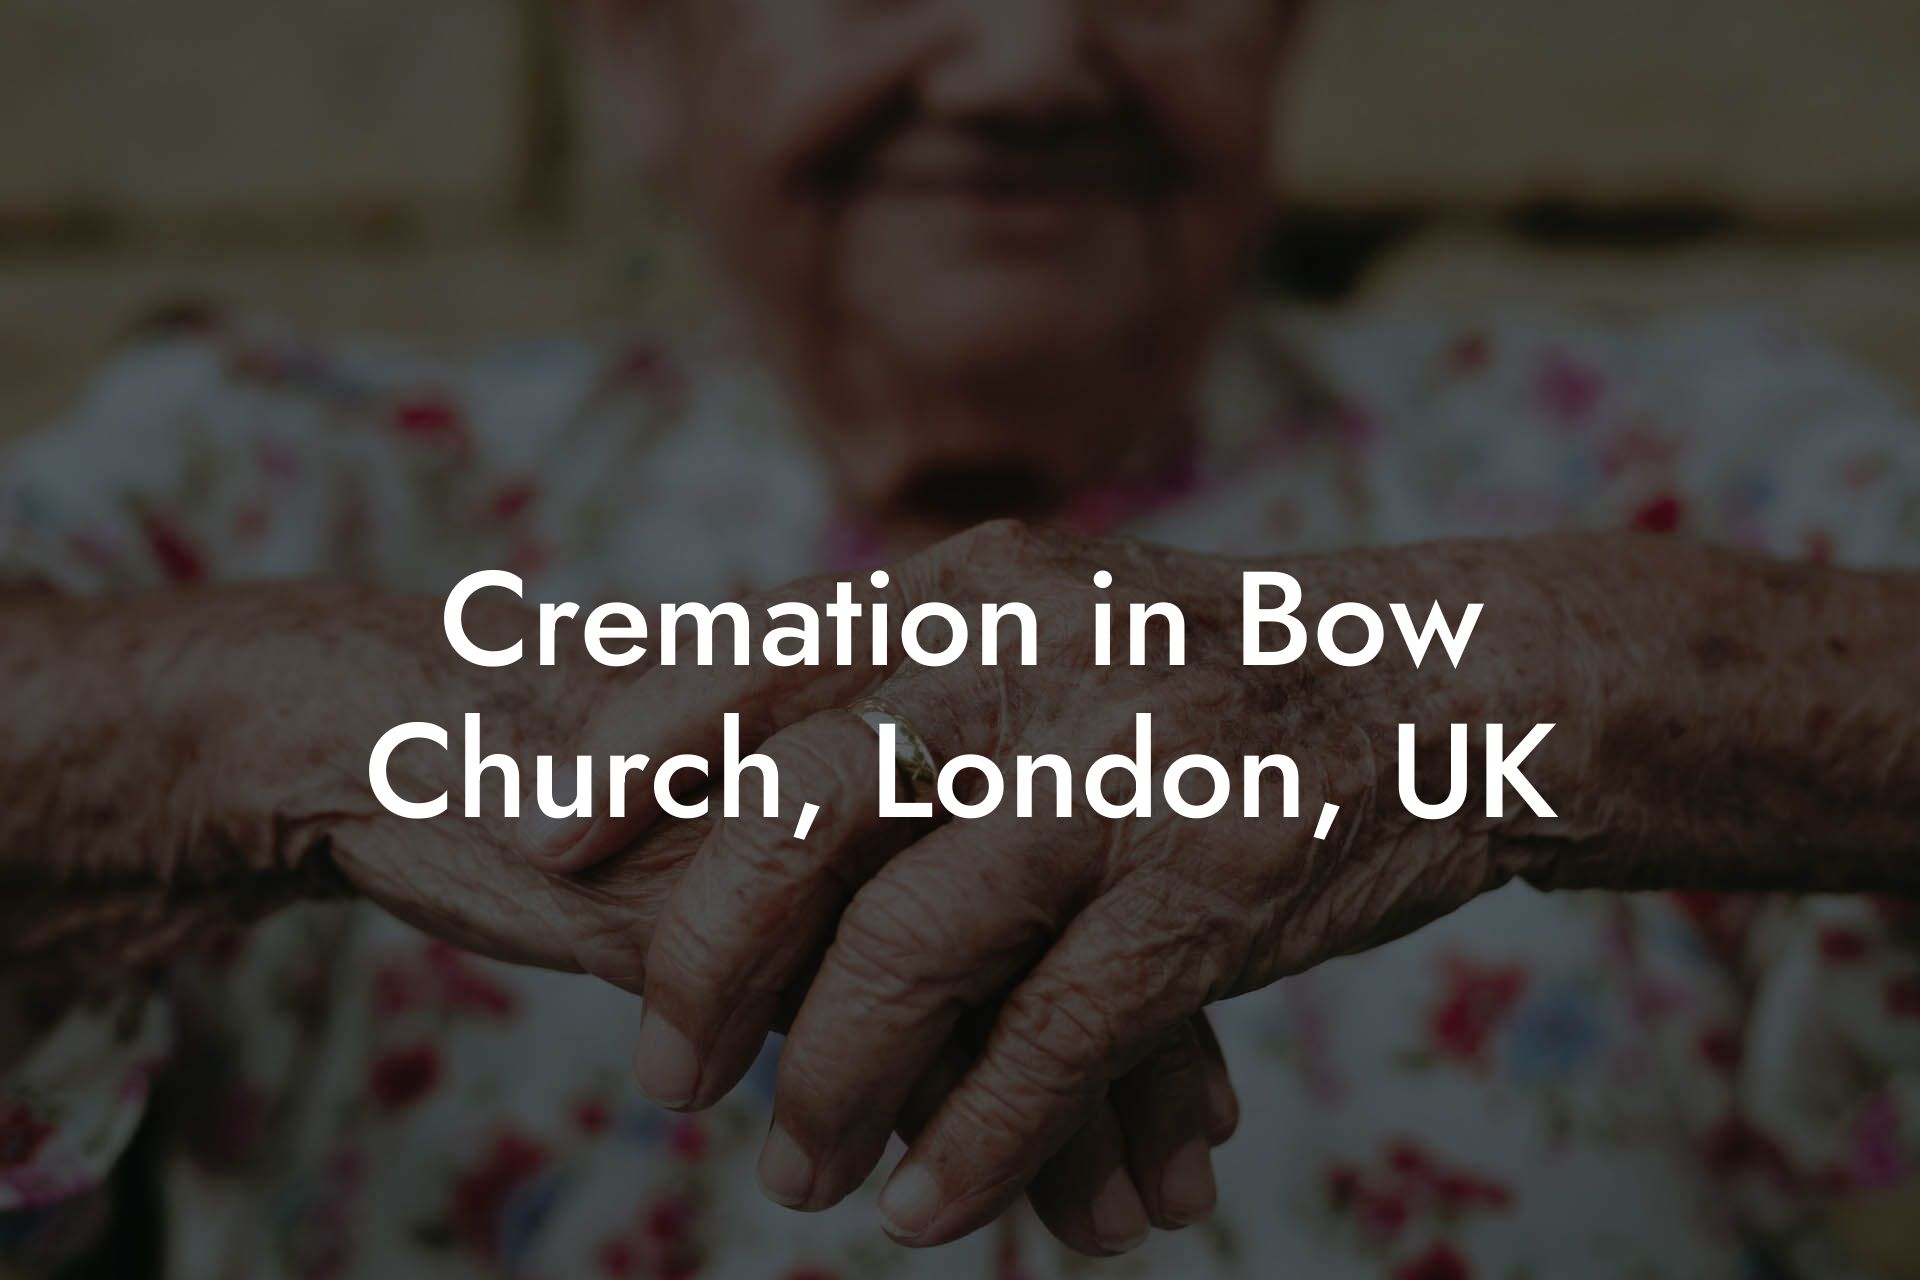 Cremation in Bow Church, London, UK